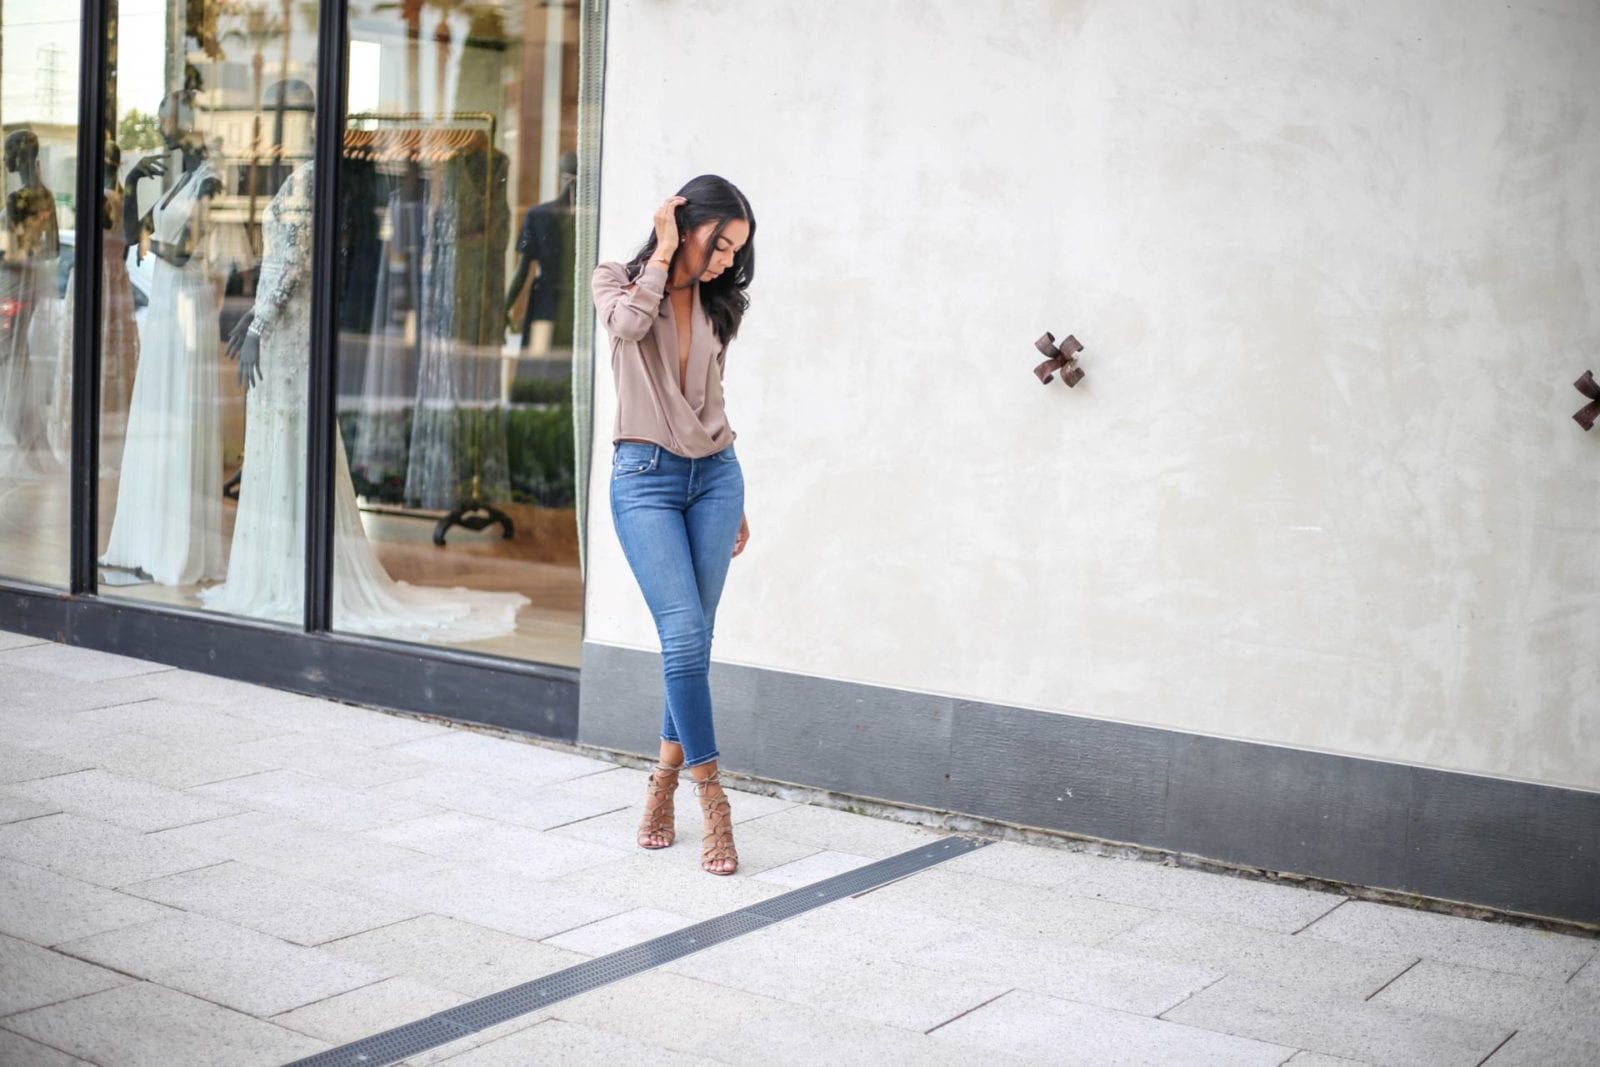 Mother crop denim with a twist front blouse and lace up nude heels